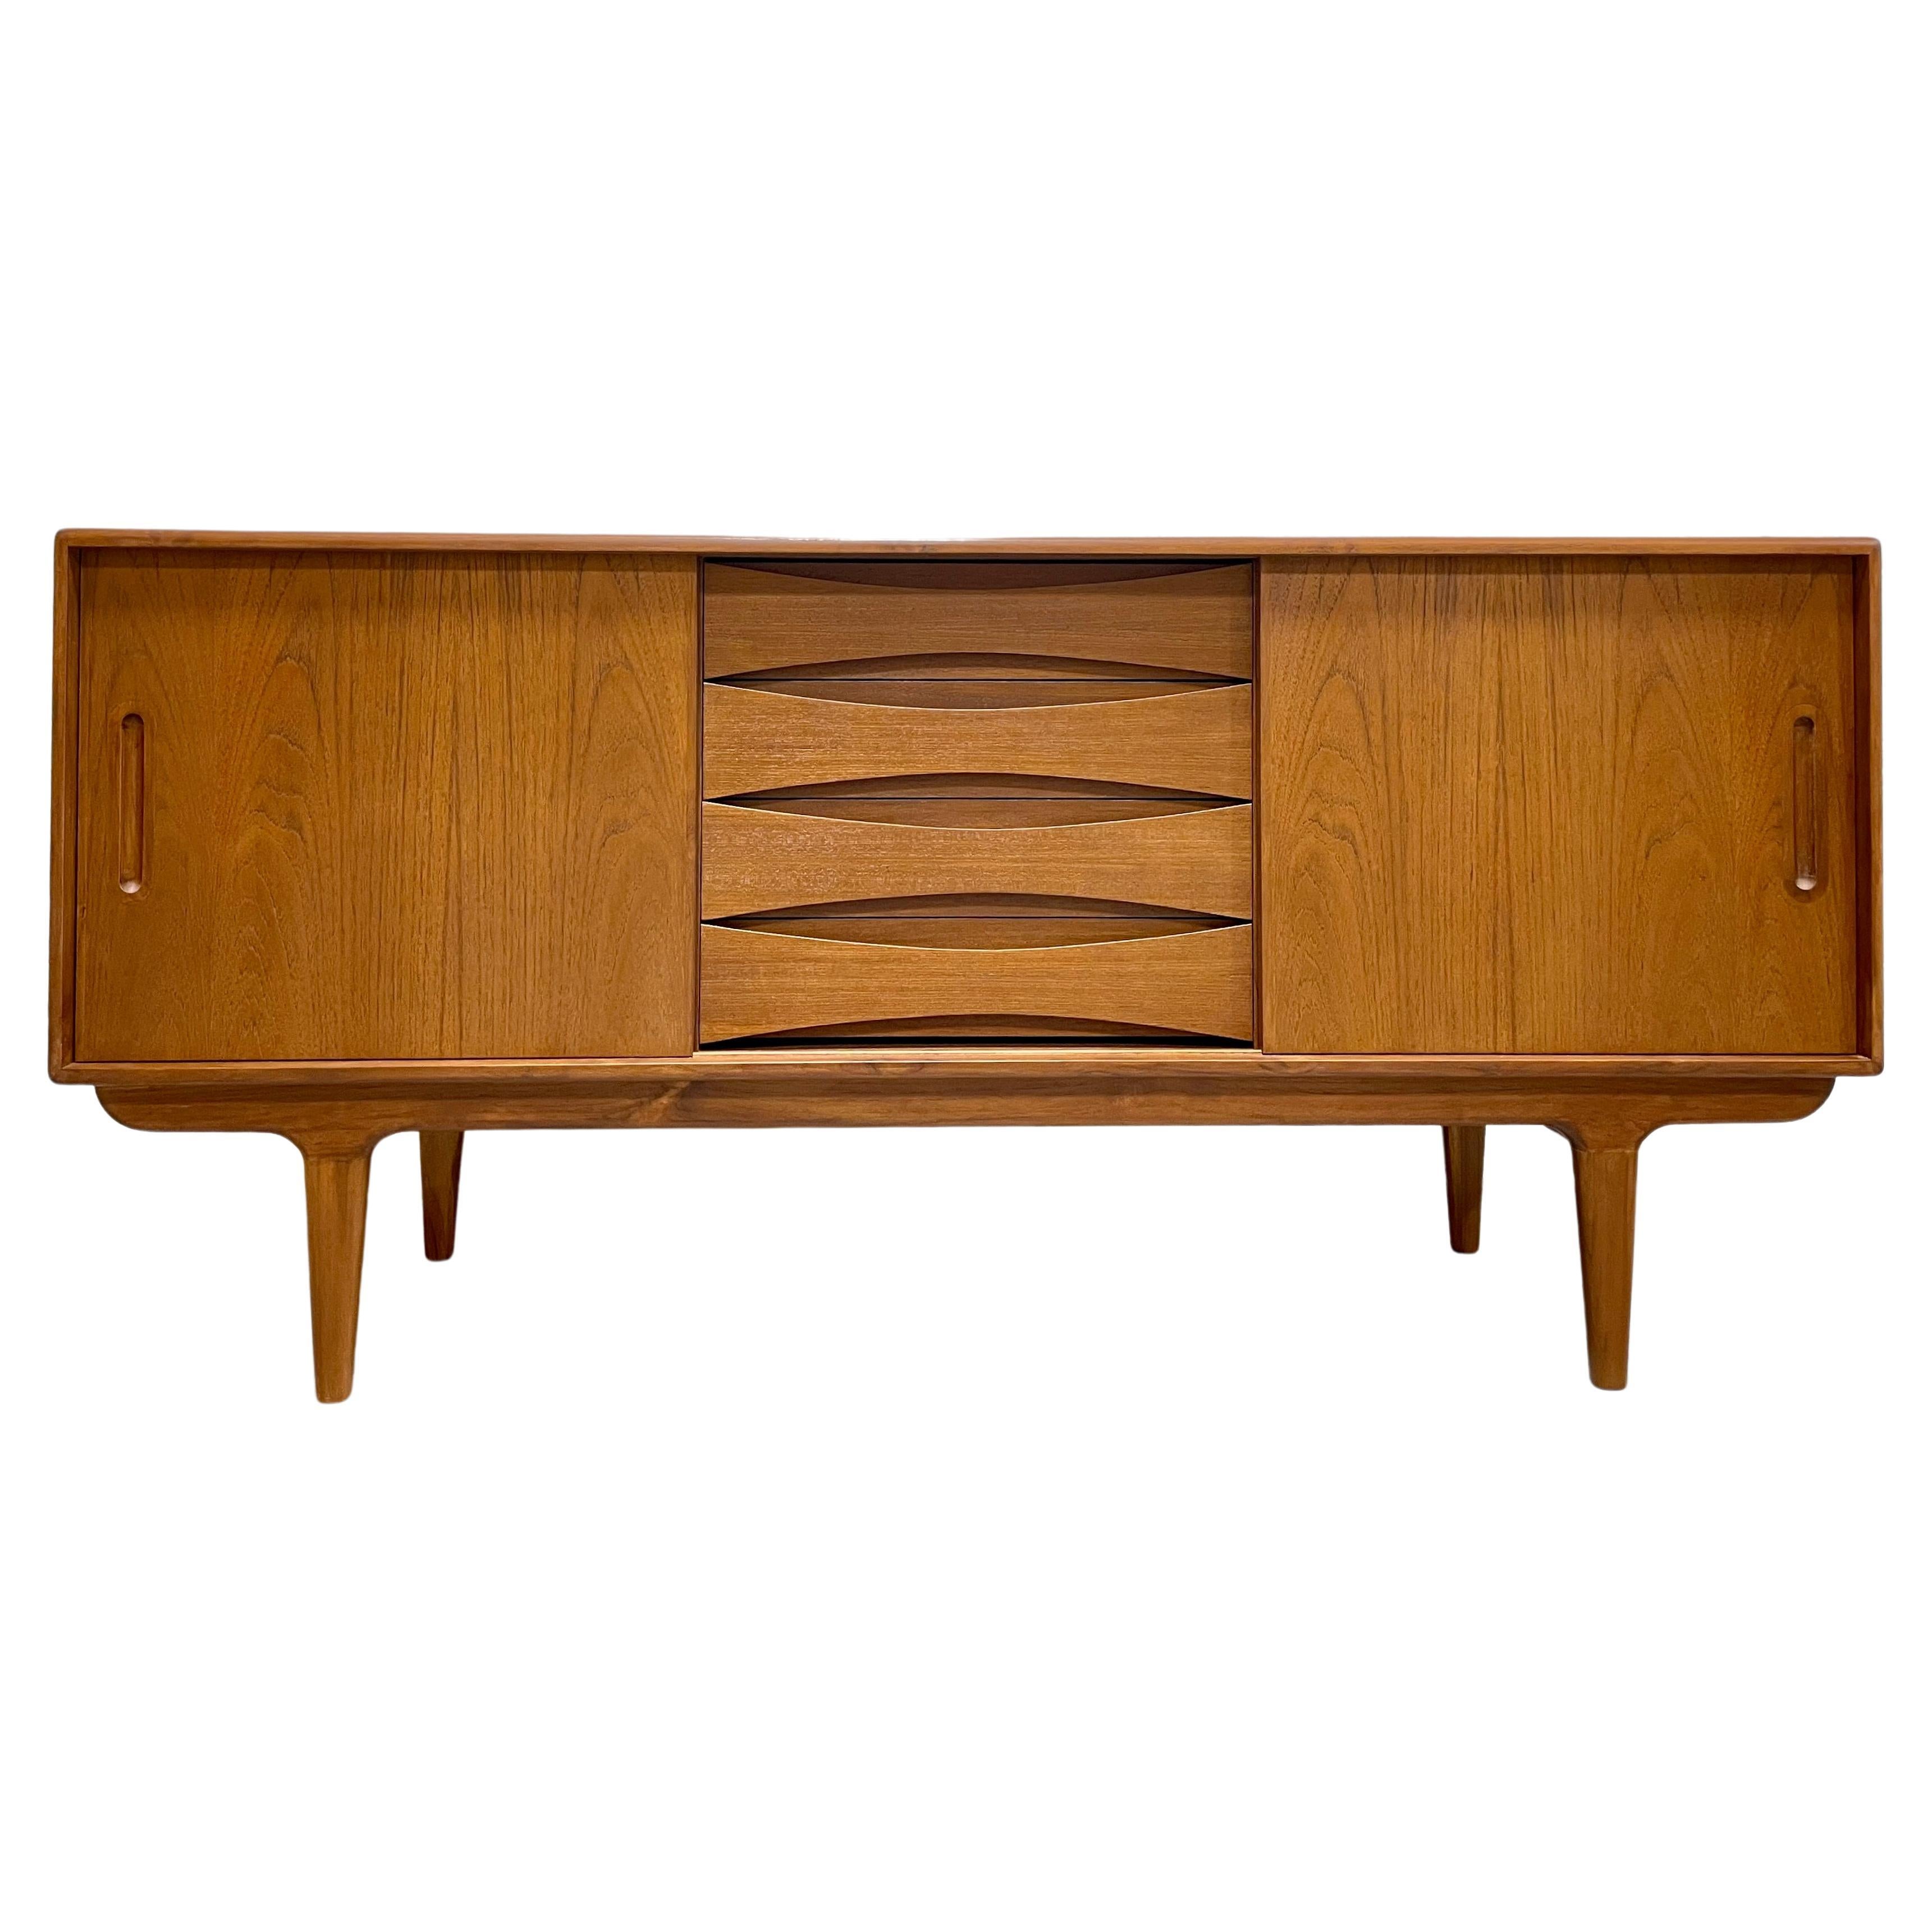 Classic Mid-Century Modern Styled Credenza / Media Stand For Sale